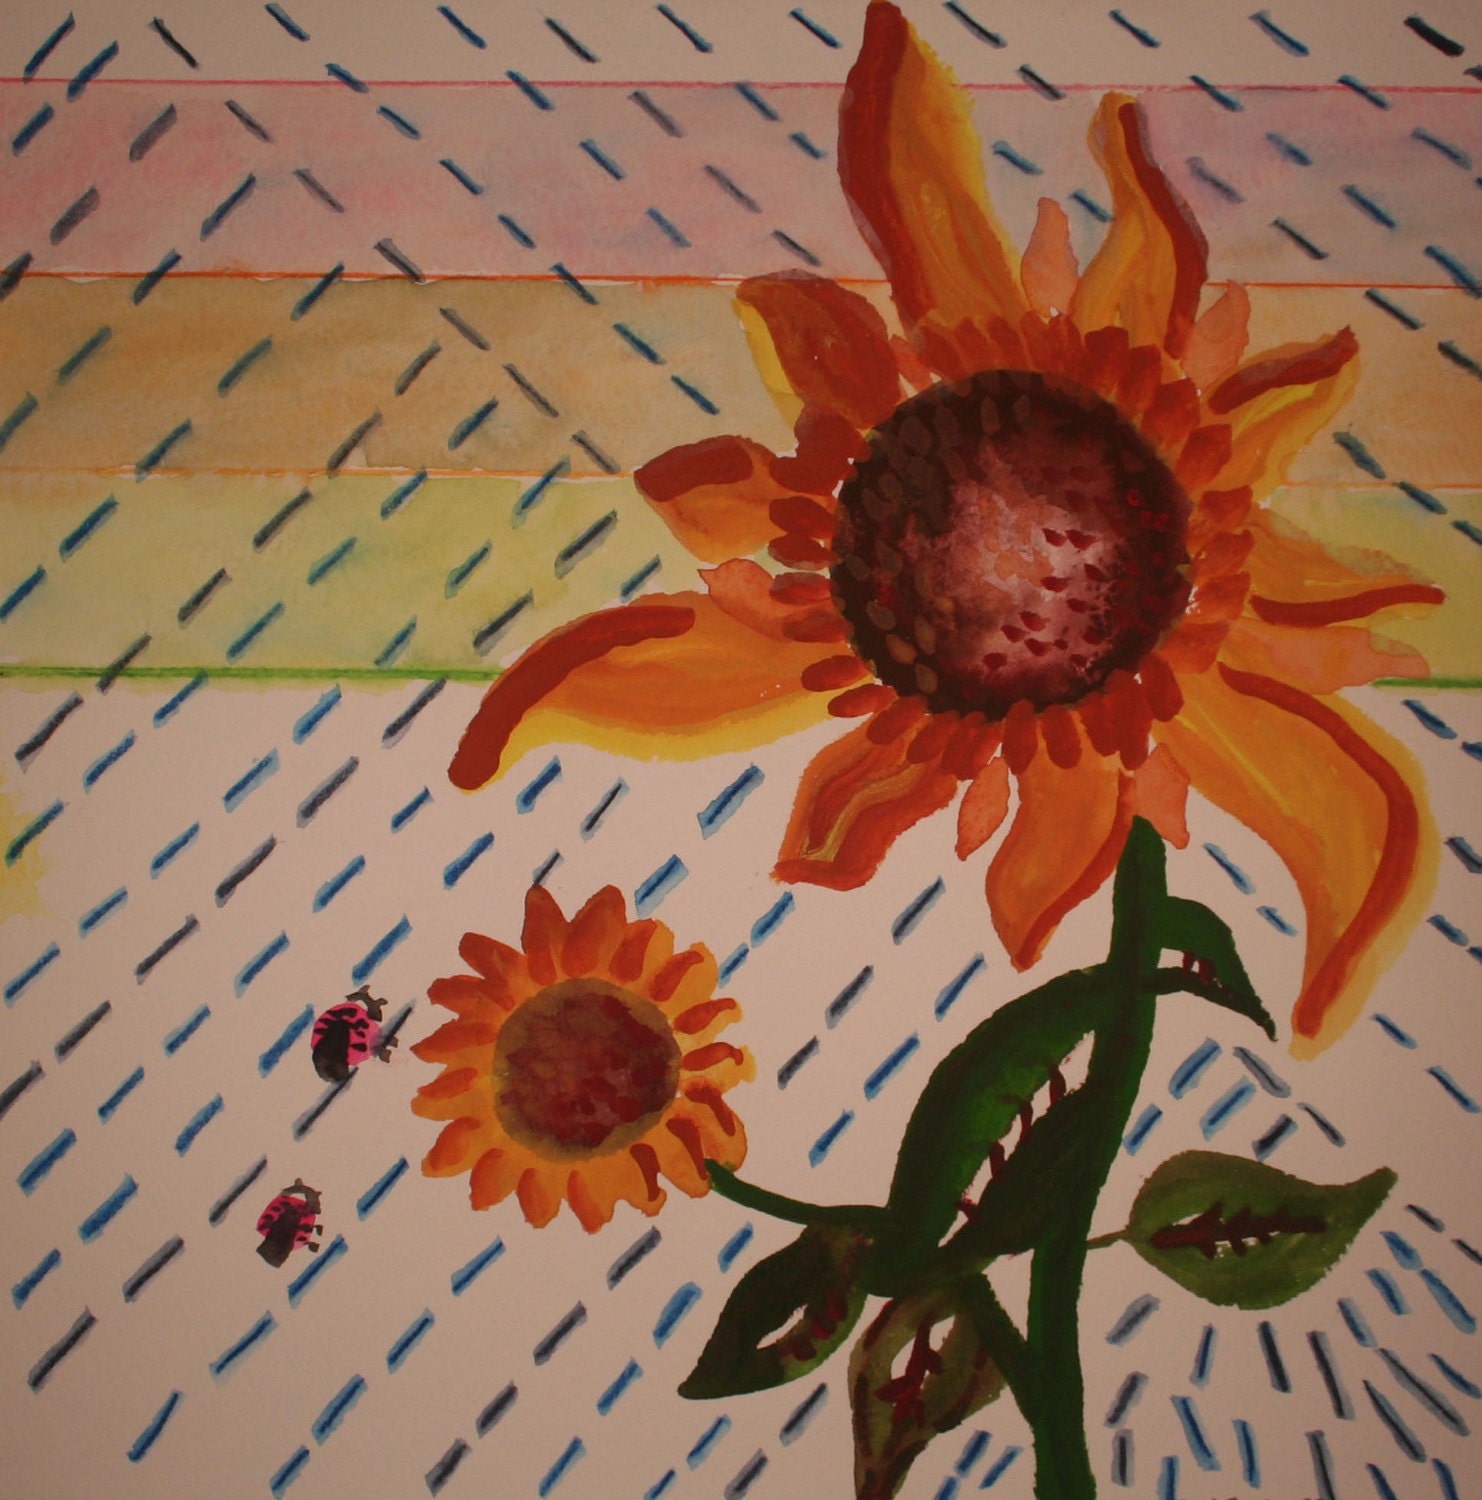 12x12 OOAK Watercolor Painting: Sunflowers in the Rain